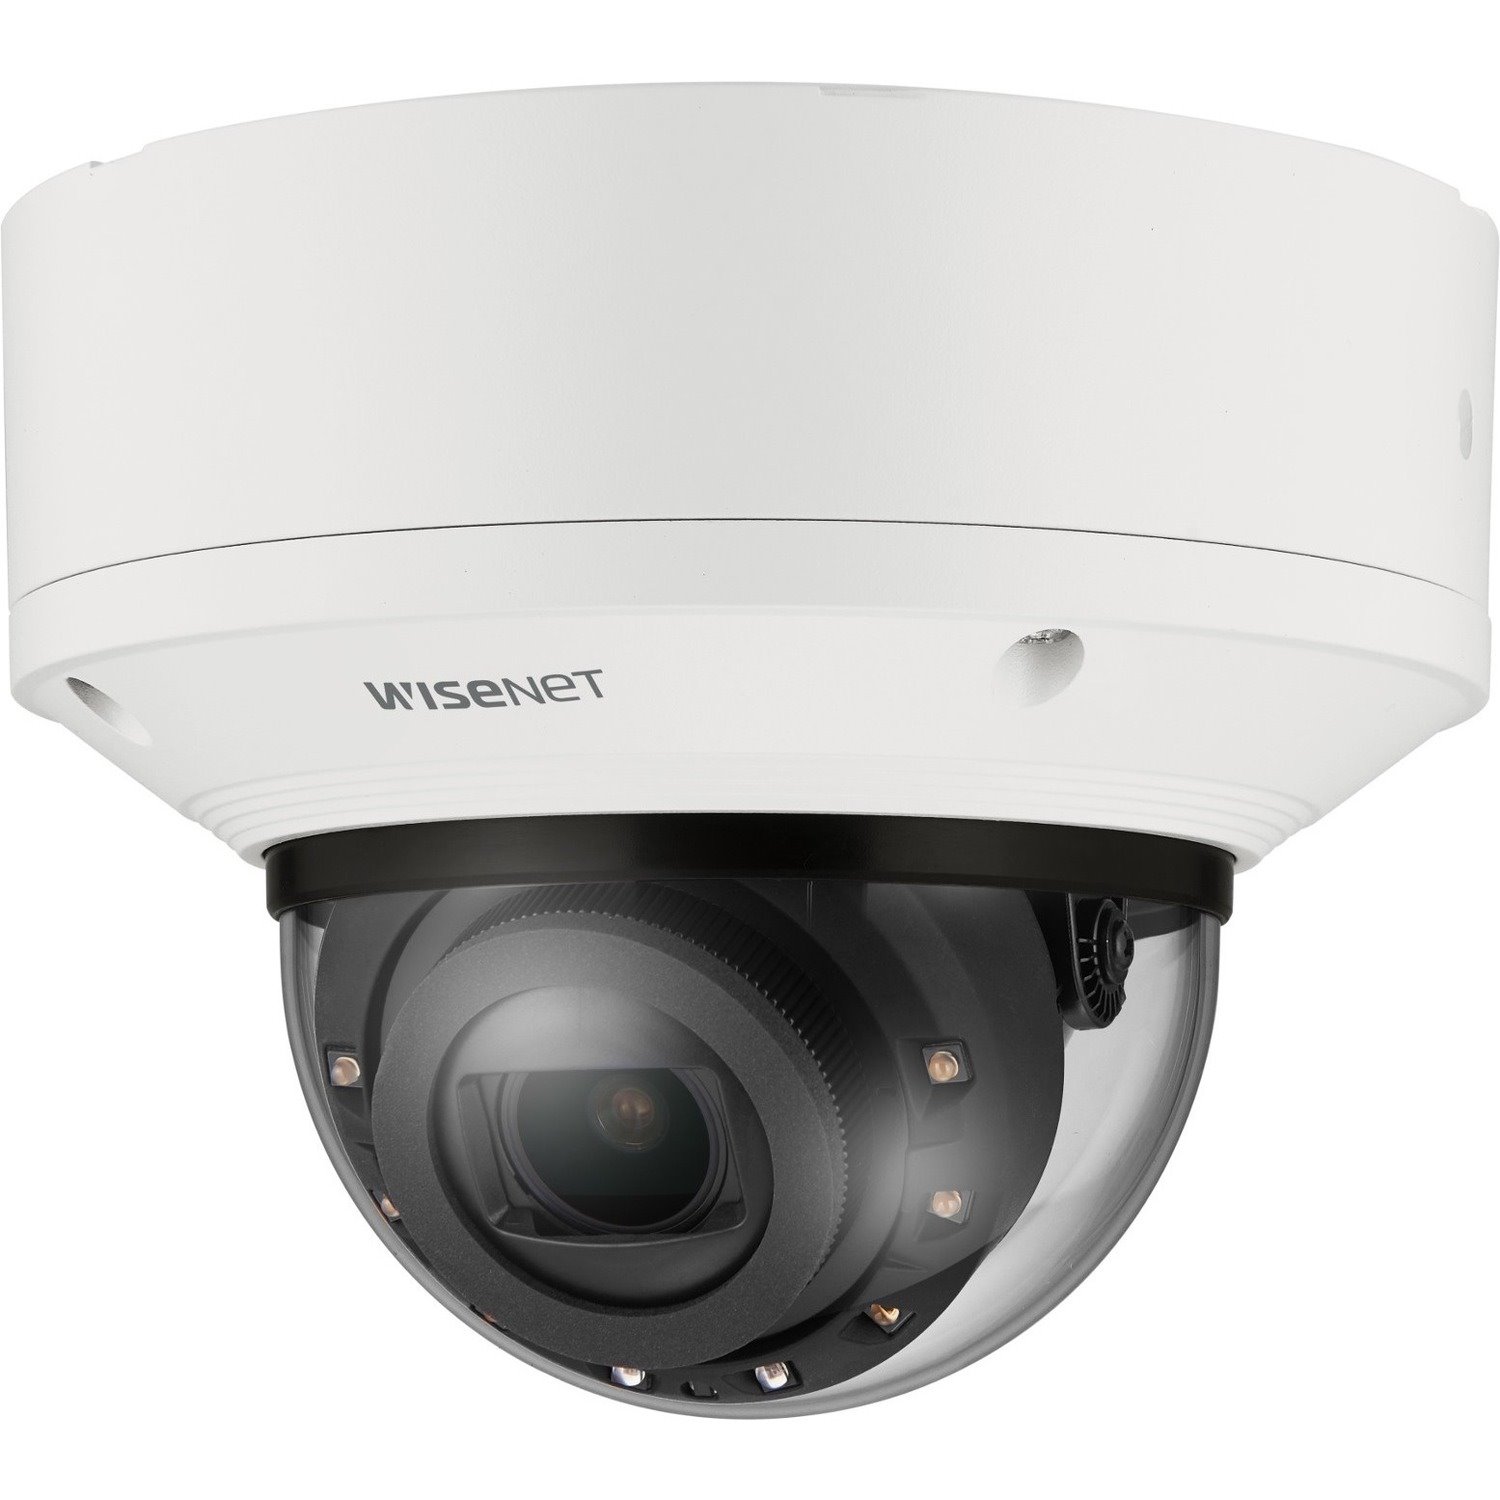 Wisenet XND-8093RV 6 Megapixel Indoor Network Camera - Color - Dome - White - TAA Compliant